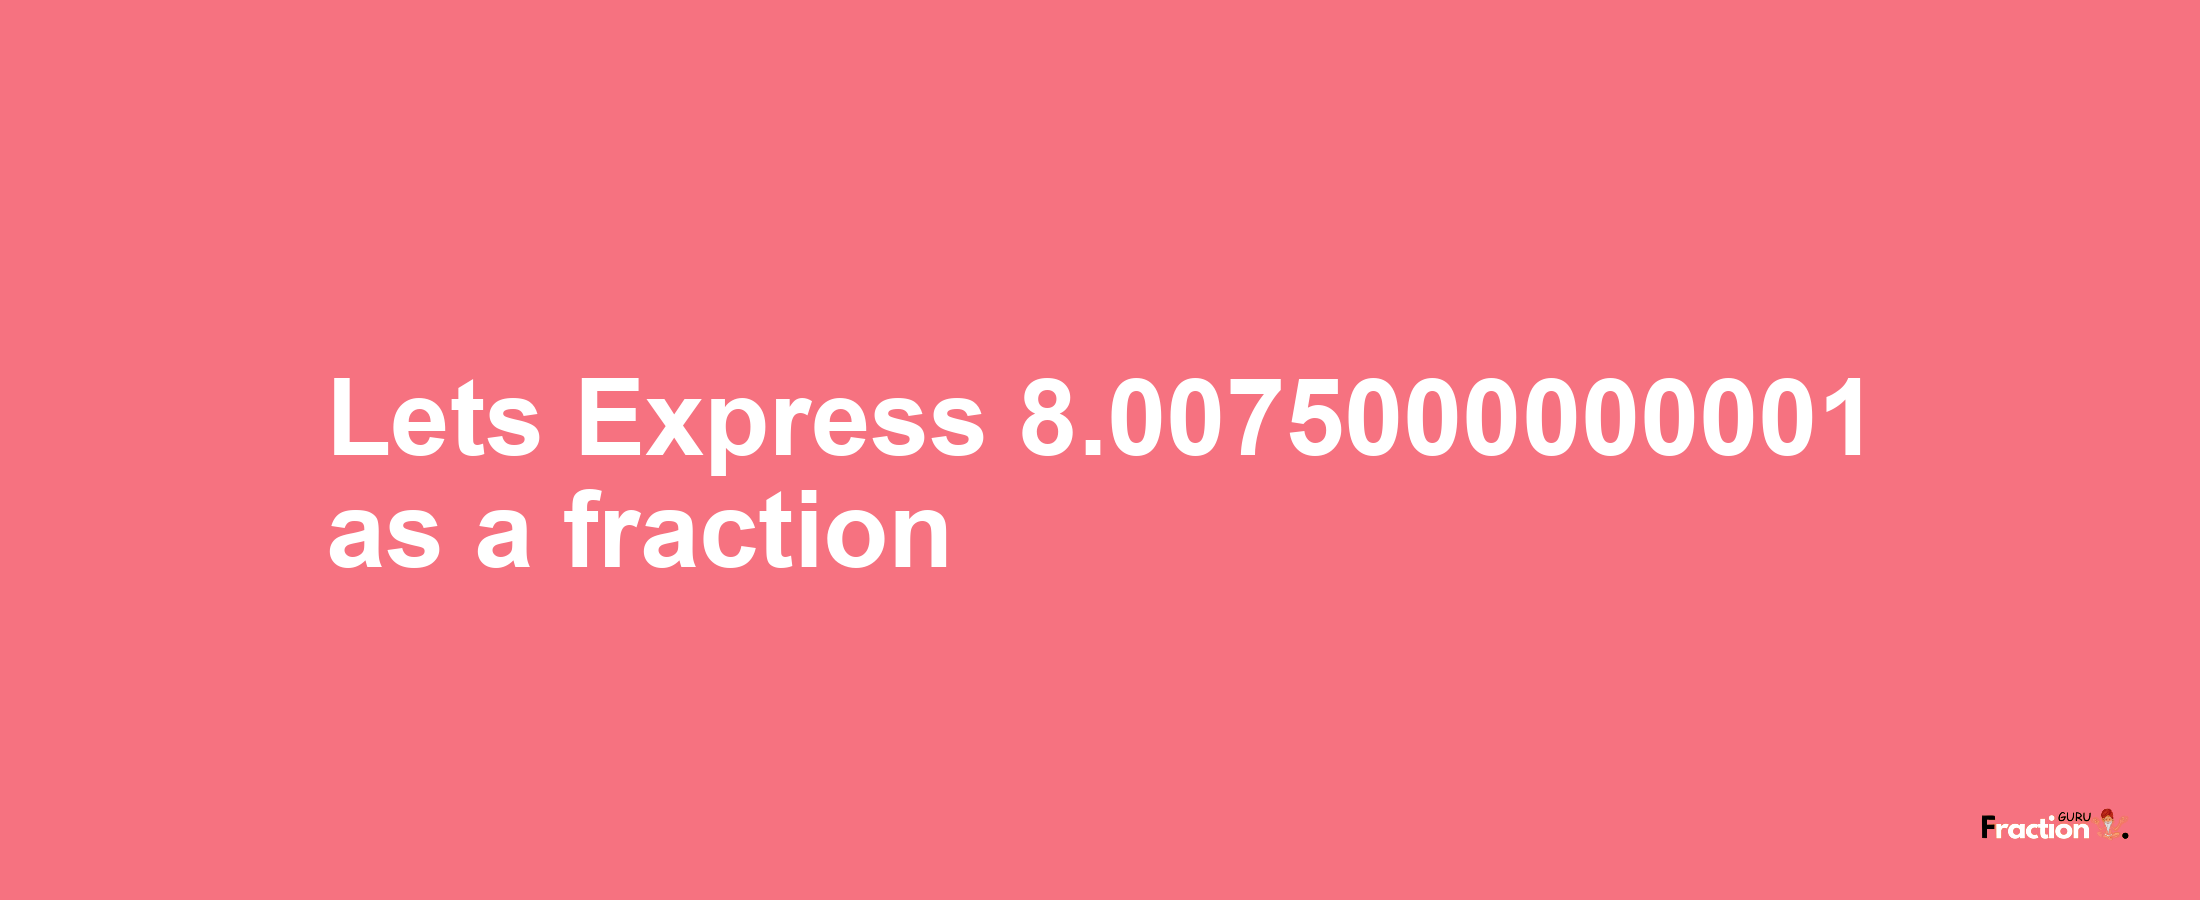 Lets Express 8.0075000000001 as afraction